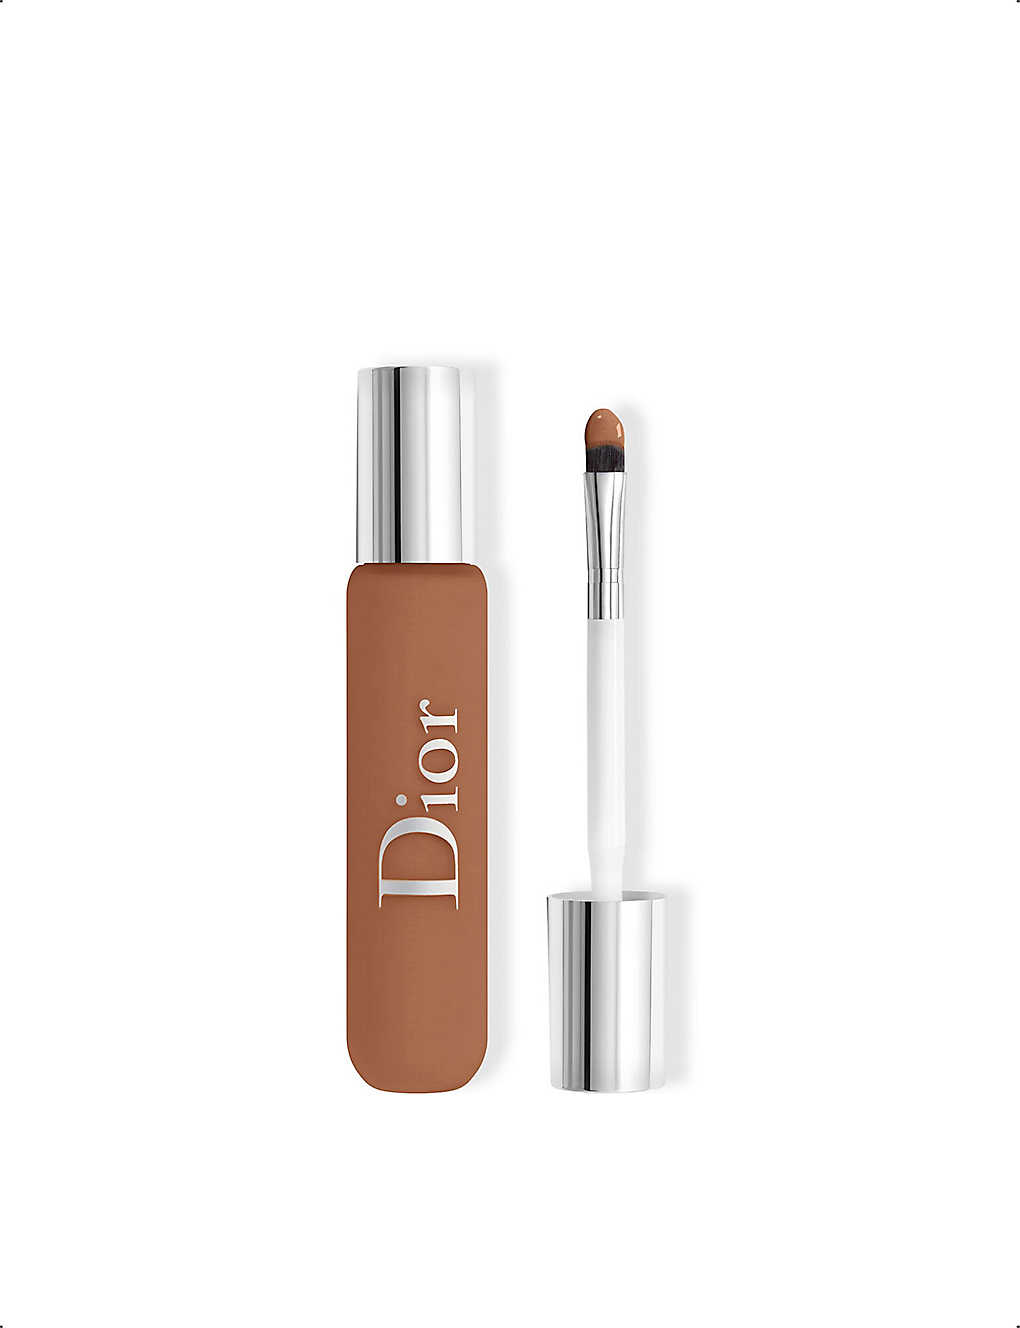 Dior Backstage Face & Body Flash Perfector Concealer 11ml In 6n